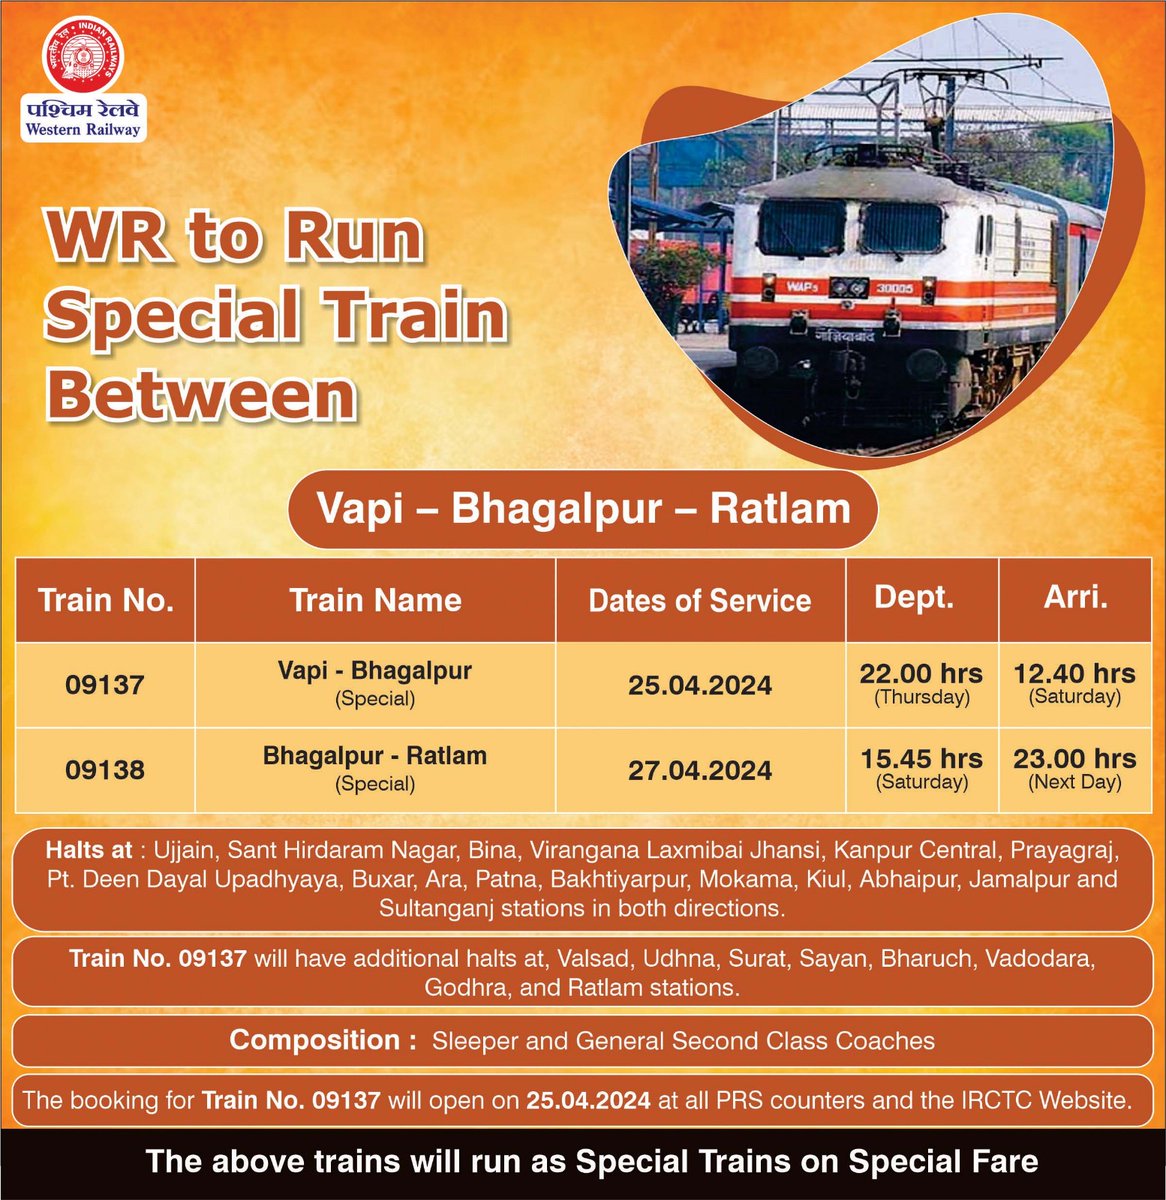 WR to run 09137/38 Vapi - Bhagalpur - Ratlam Special for the convenience of passengers and to meet the travel demand.

The booking for train no. 09137 will open on 25.04.2024, tomorrow, at PRS counters and IRCTC website. 

#WRUpdates